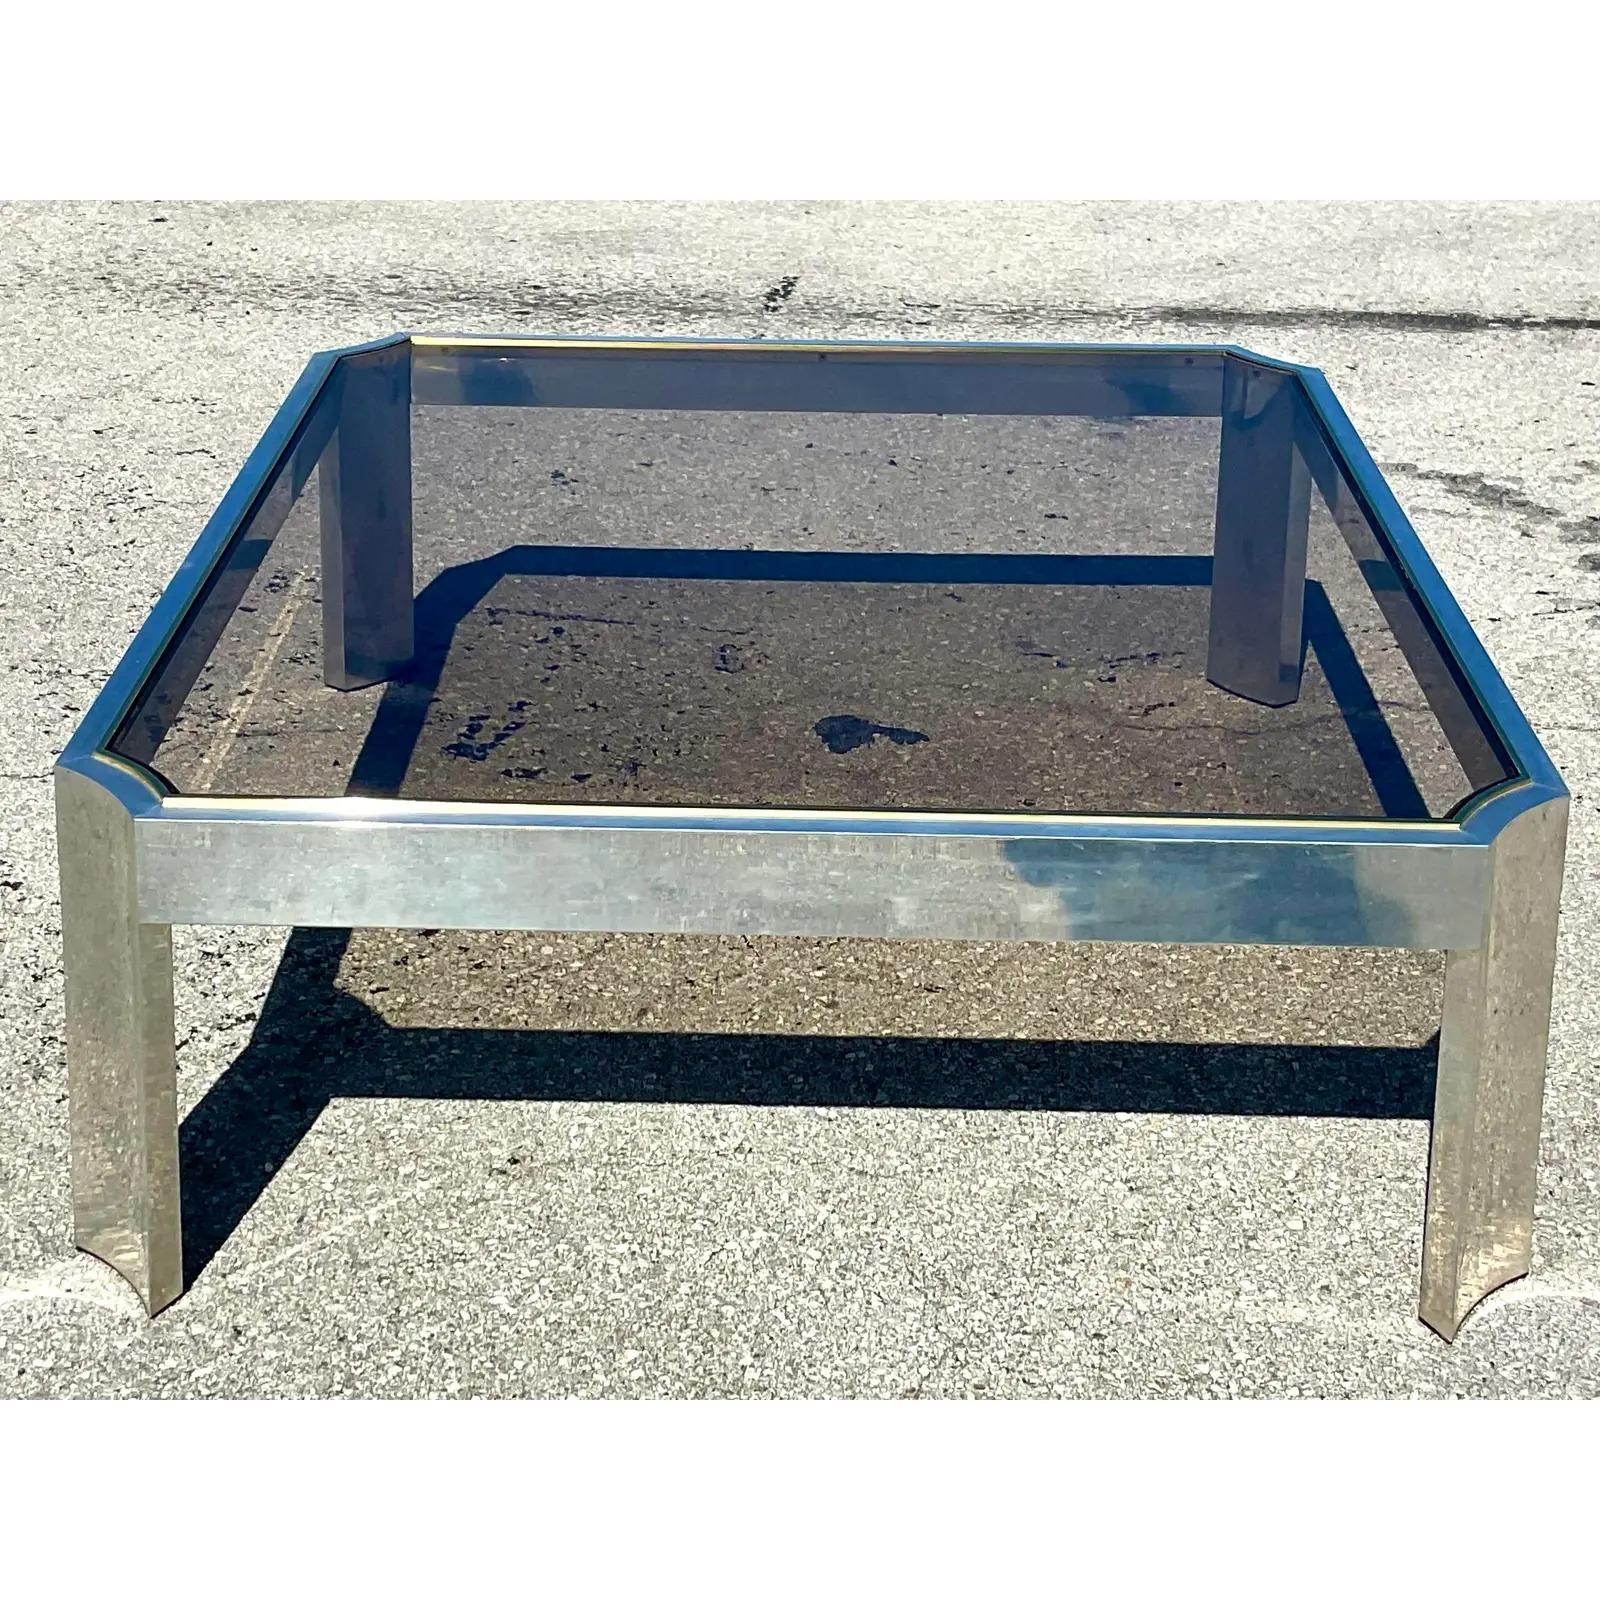 Fabulous vintage Contemporary coffee table. Chic notched corners with brushed chrome and brass inlay. Inset smoked glass center panel. Acquired from an El Cid estate.